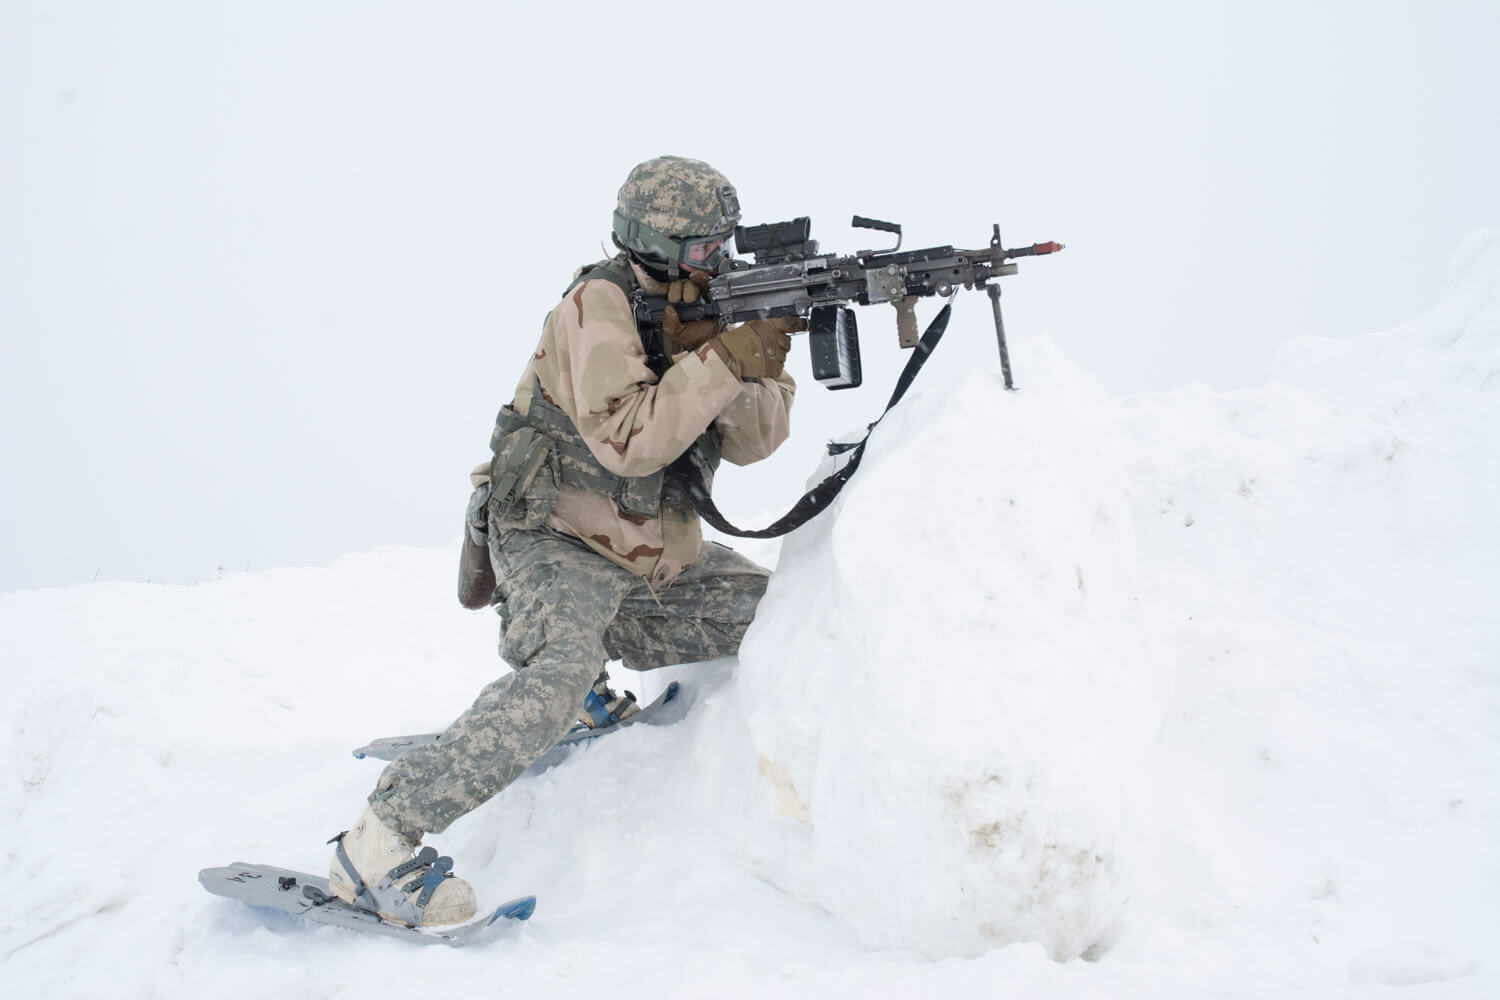 An Alaska Army National Guard Soldier lines up his shot as he plays the role of OPFOR during a notional attack at the Murphy Dome Long Range Radar Site near Fairbanks, Alaska. The scenario was part of Arctic Eagle 2018 – a cold-weather training exercise hosted by the Alaska Army National Guard. It was held Feb. 20 – March 8 and took place at multiple locations across Alaska including Fairbanks, Valdez, the Alaska/Canada Boarder, Joint Base Elmendorf–Richardson, and Fort Greely. National Guard Bureau photo by Lauren di Scipio